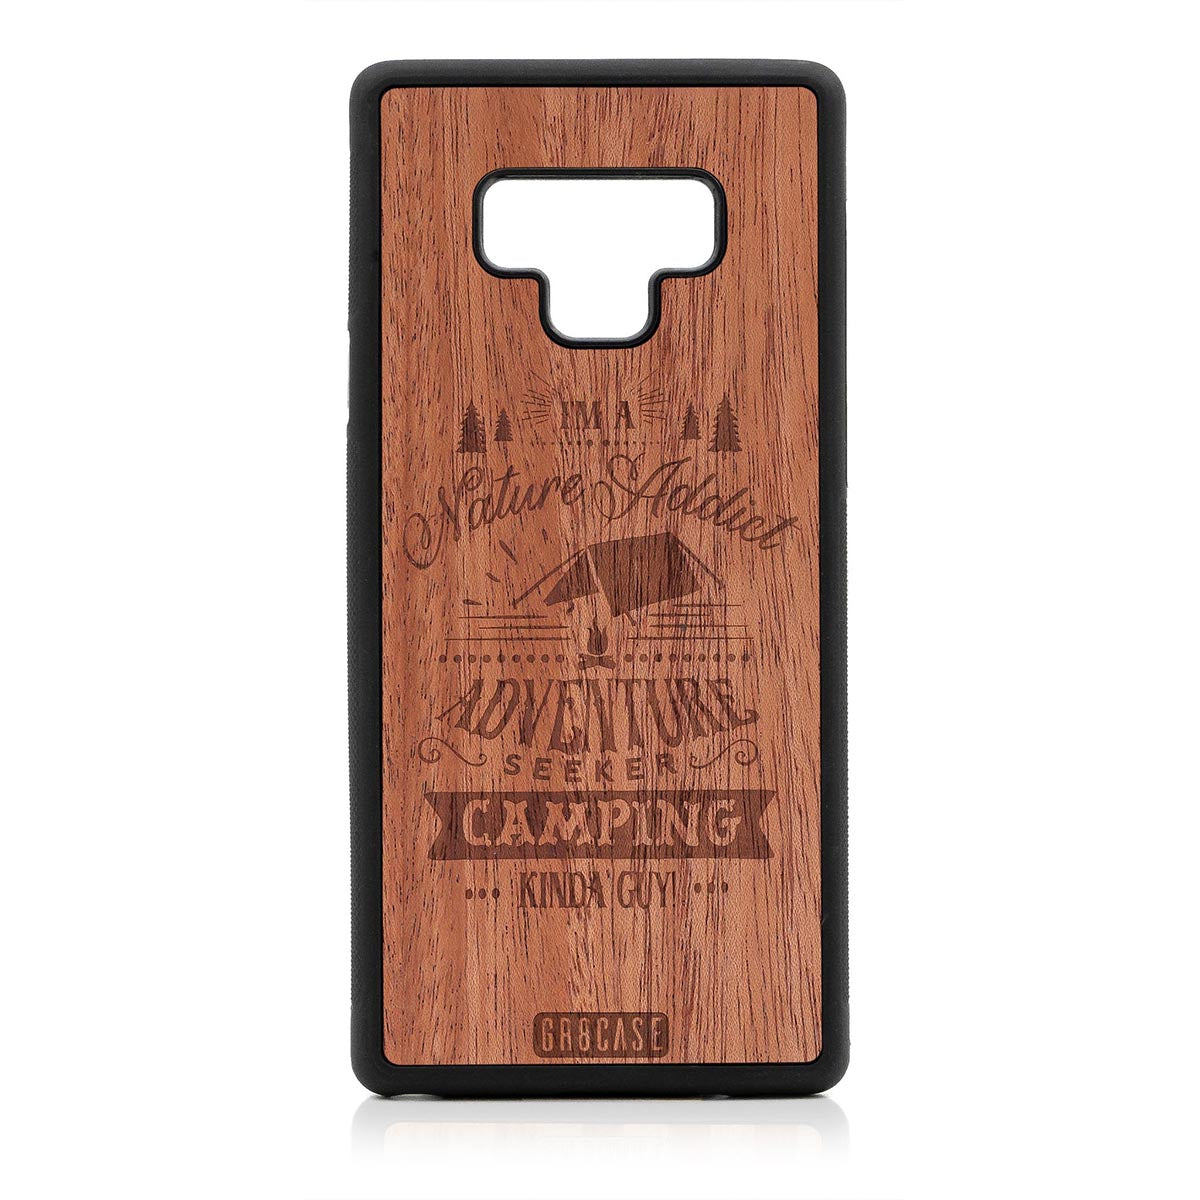 I'm A Nature Addict Adventure Seeker Camping Kinda Guy Design Wood Case Samsung Galaxy Note 9 by GR8CASE